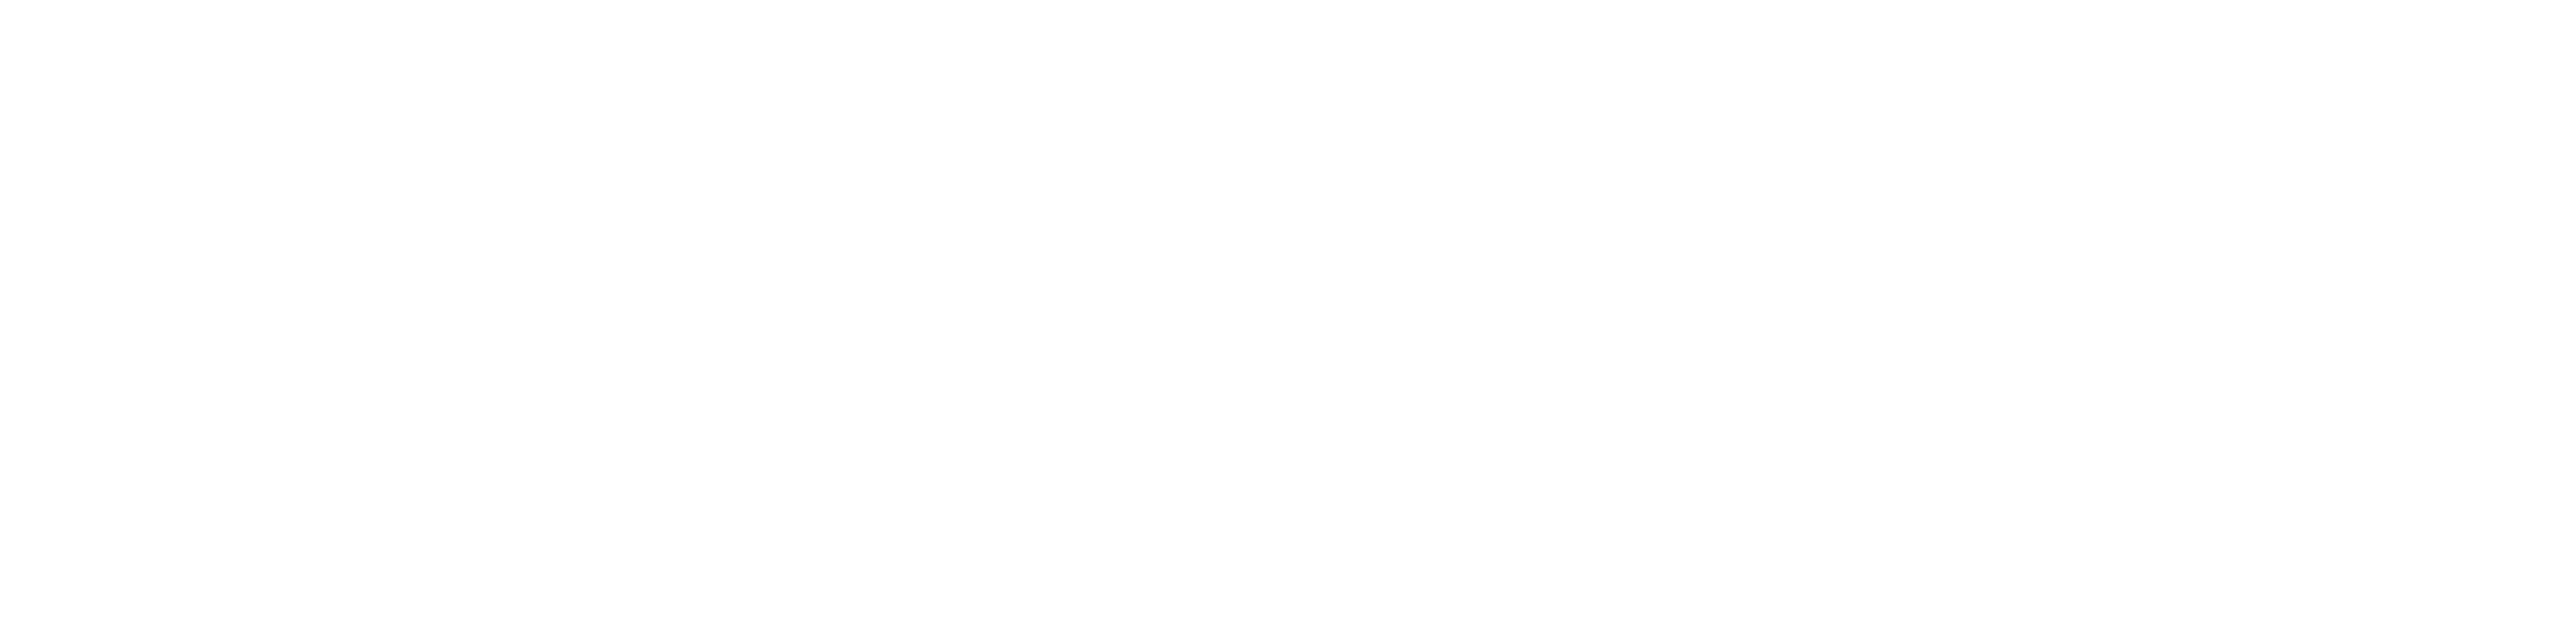 New Native Group